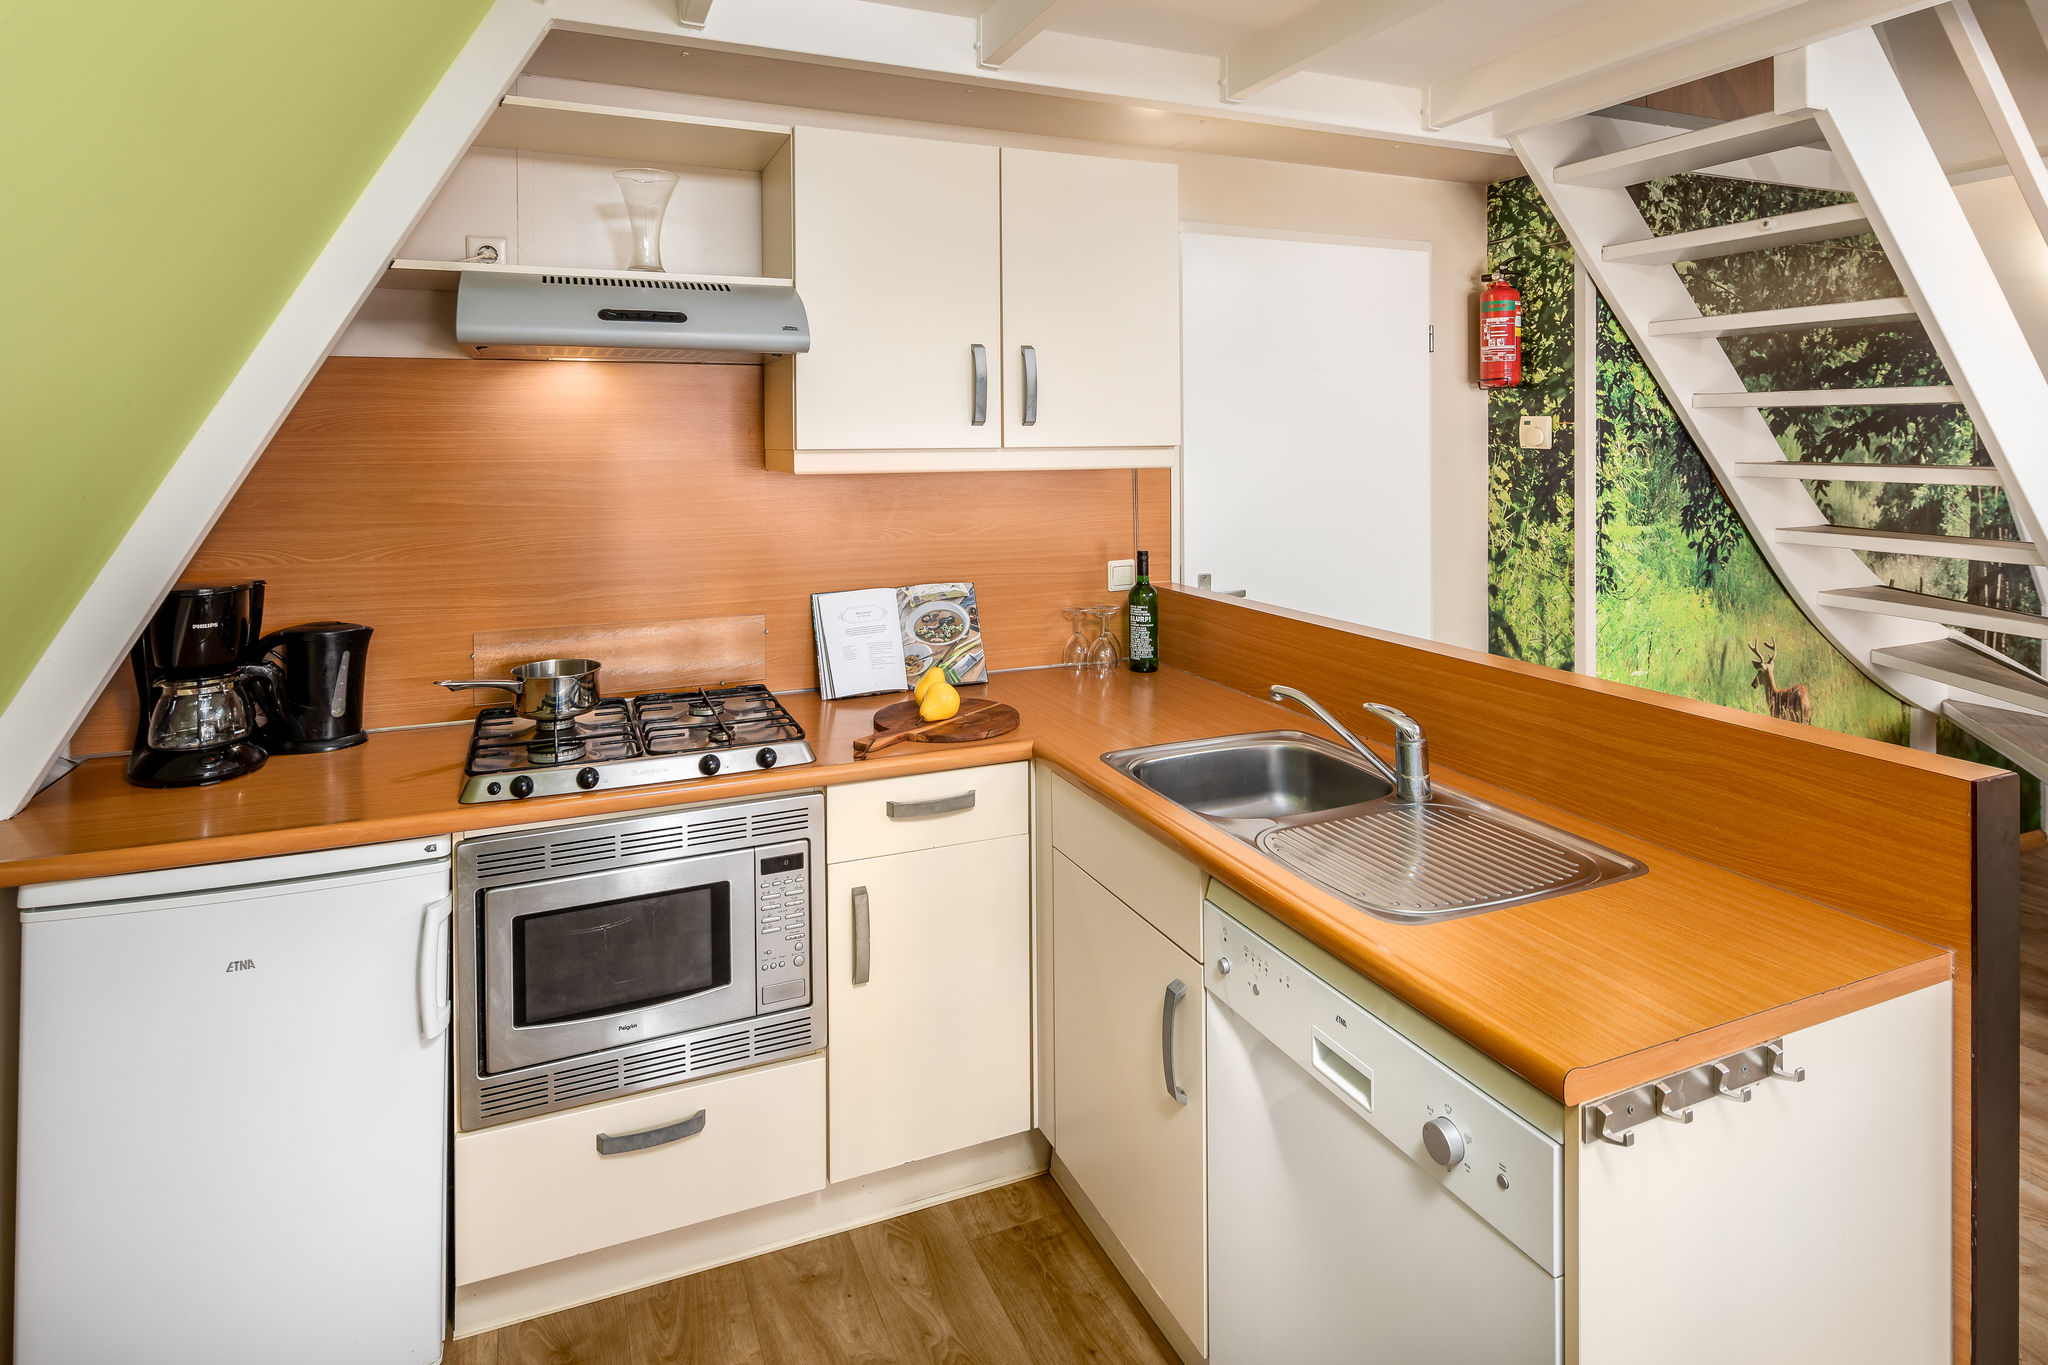 Restyled bungalow with dishwasher, in natural surroundings